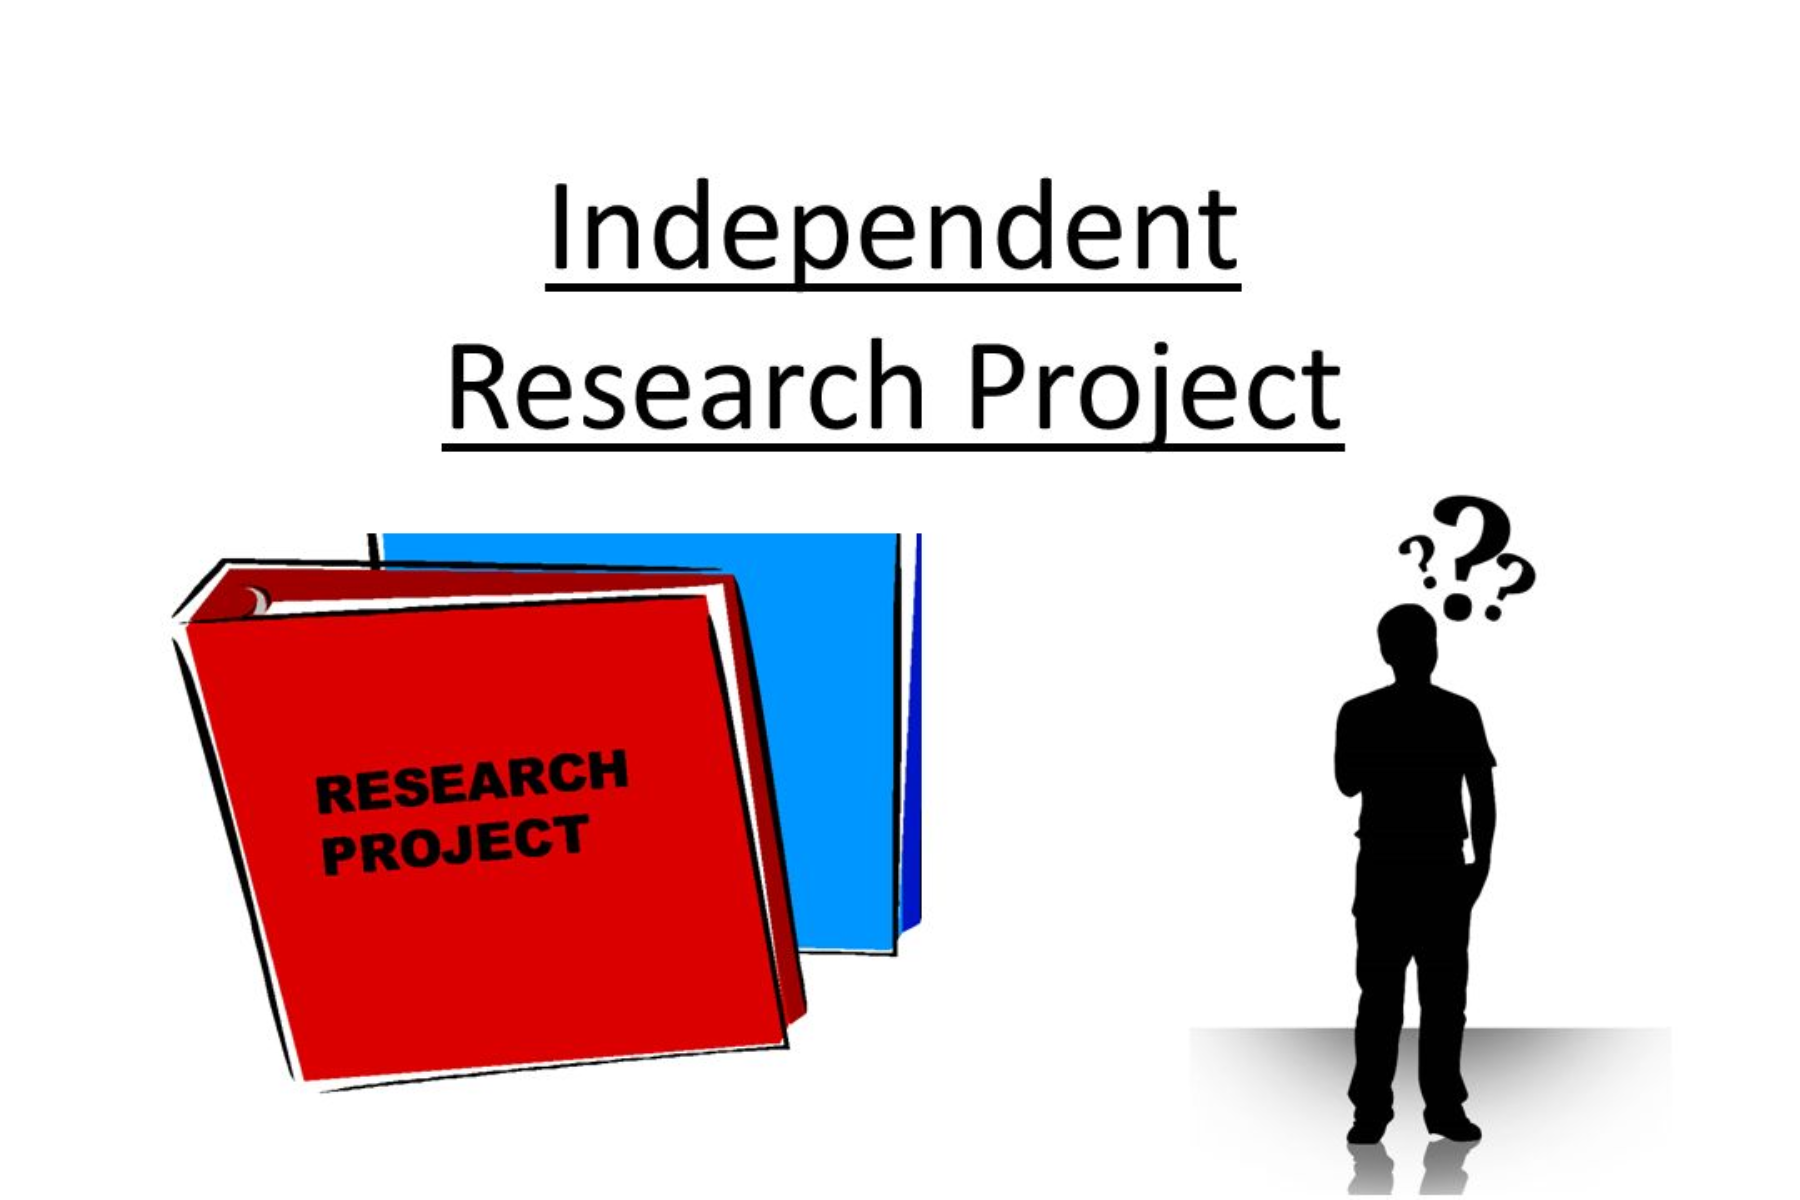 How To Do An Independent Research Project - A Not-so-easy Task But Rewarding